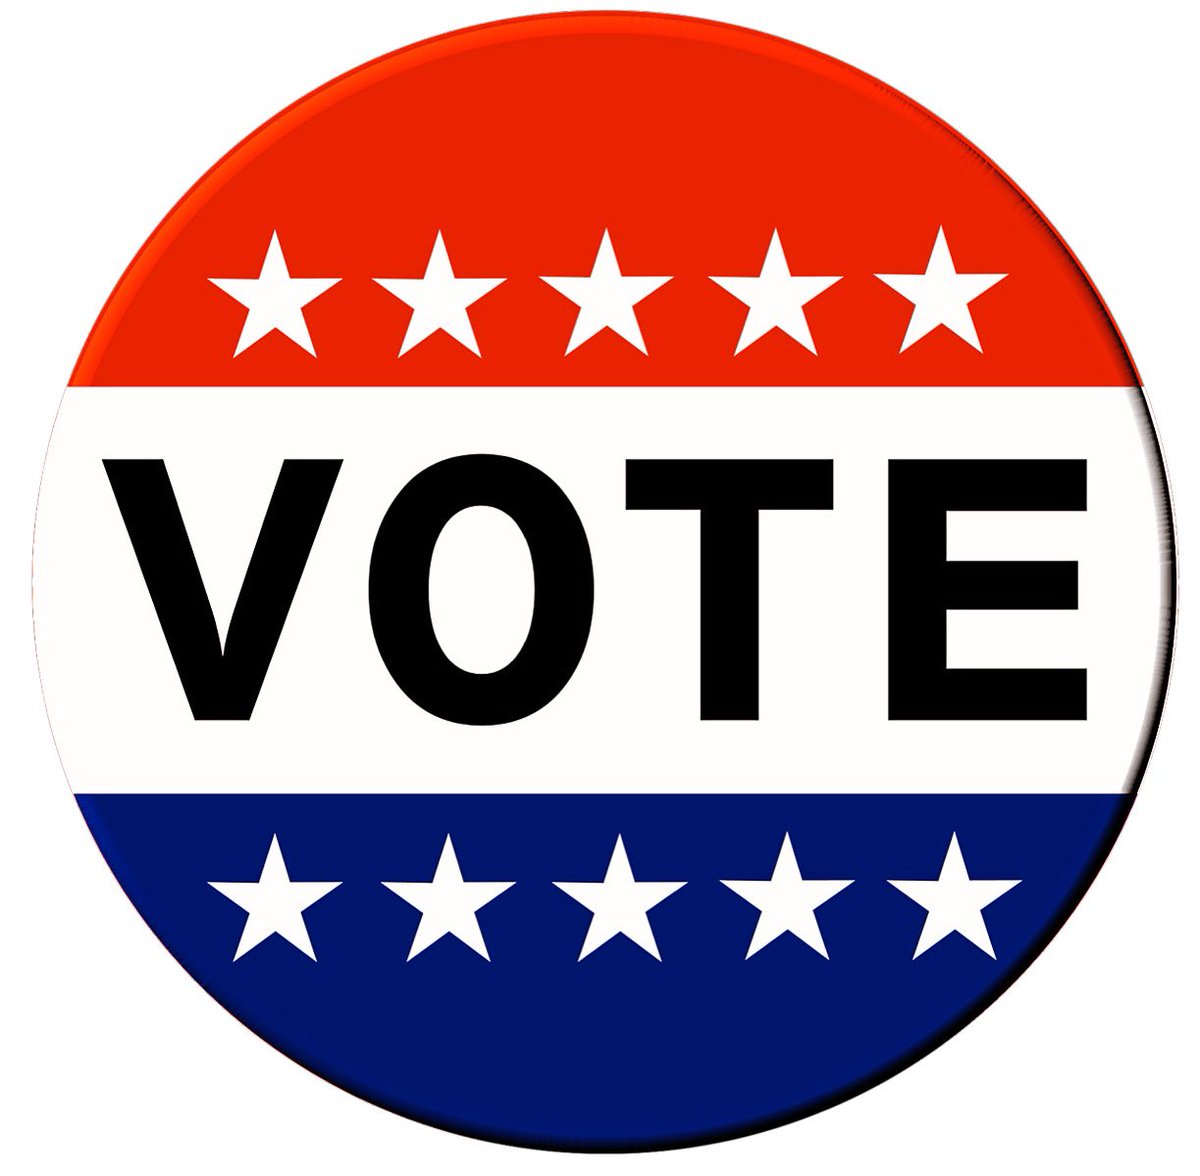 Tomorrow is the referendum for the town and school budgets. Polls are open from 6 AM to 8 PM!